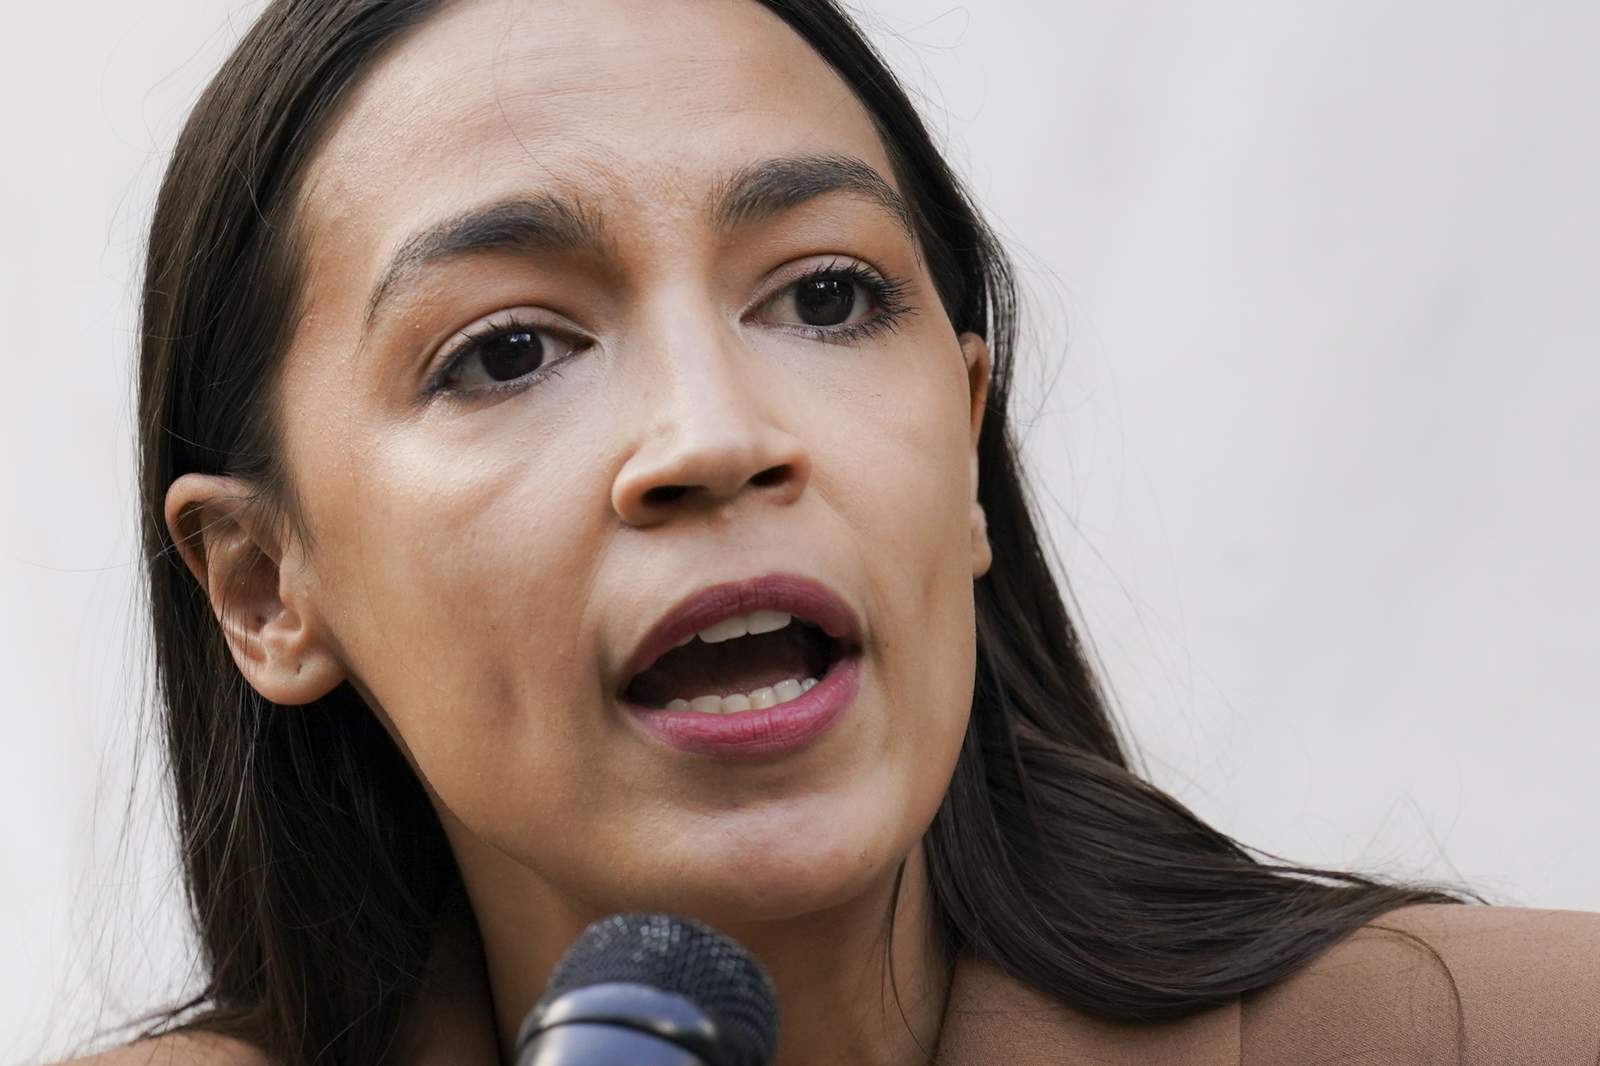 Texan charged in Capitol riot accused of threatening to ‘assassinate’ Rep. Ocasio-Cortez, FBI says